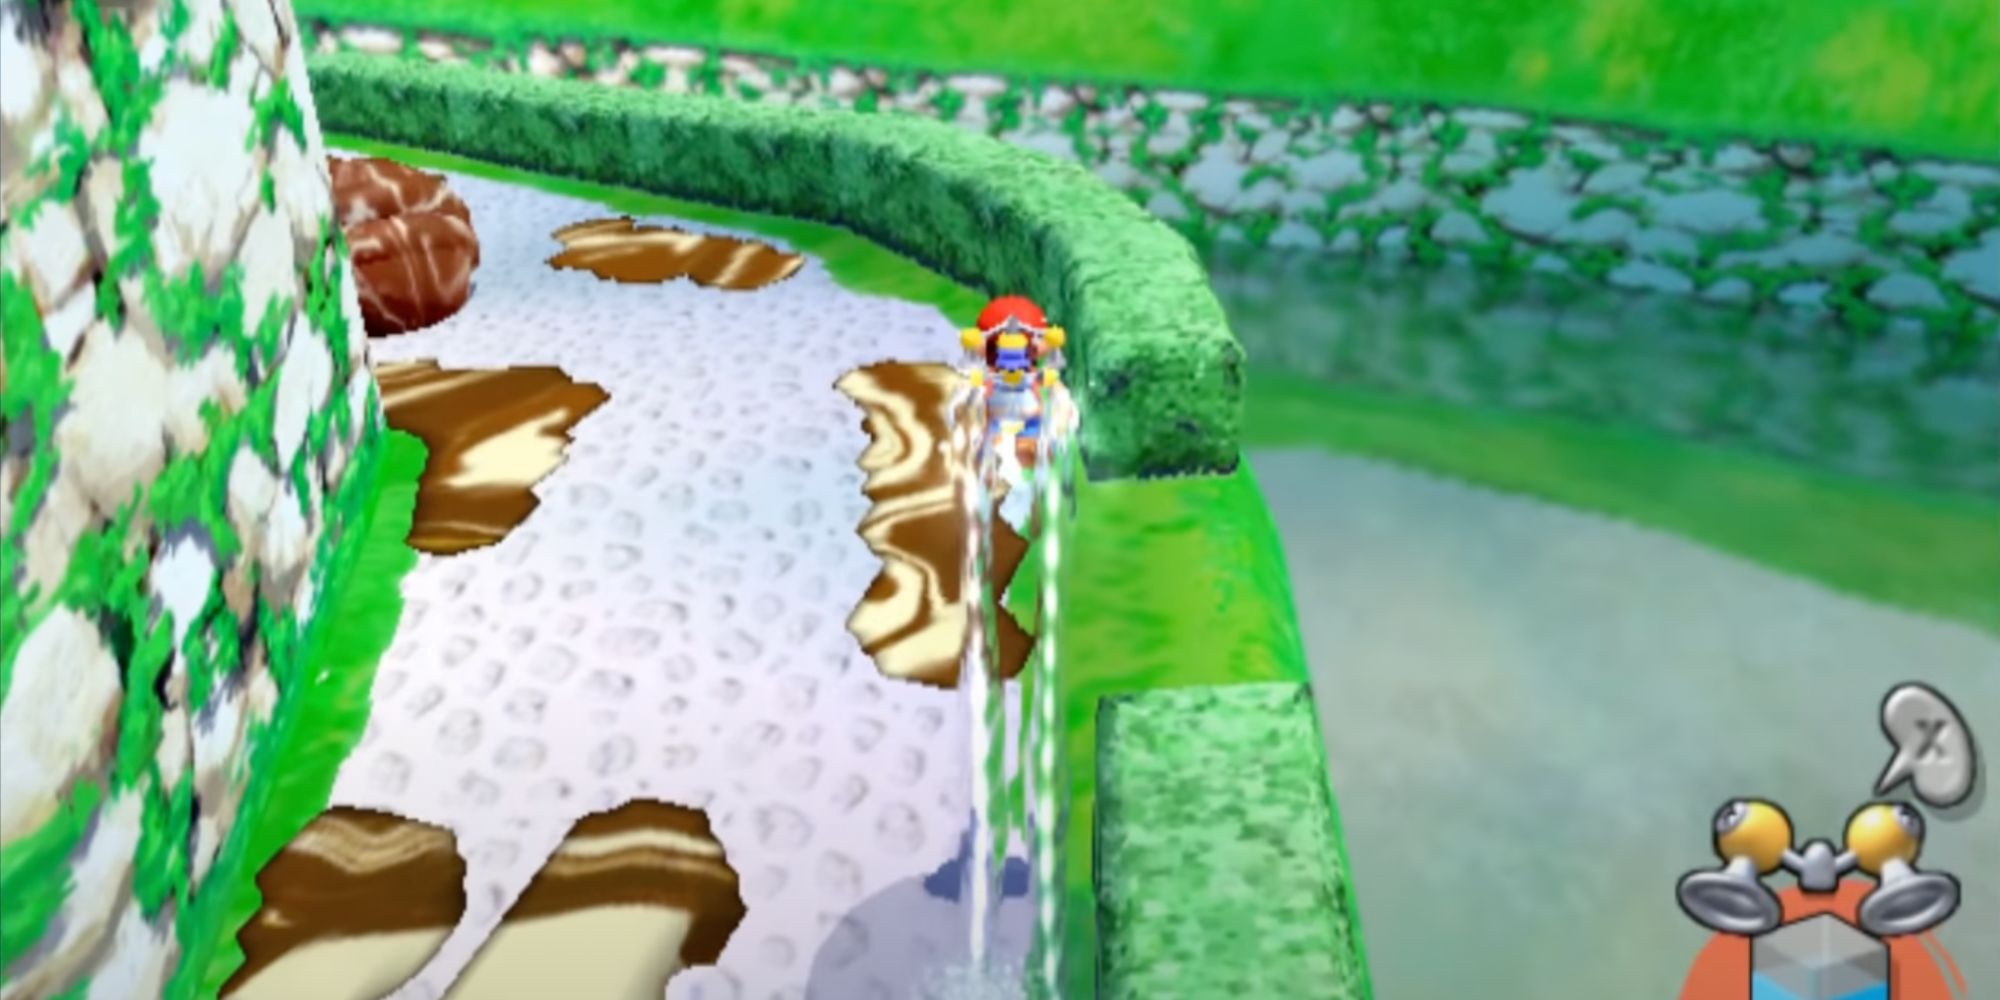 Super Mario Sunshine: Mario using his water pack to glide over mud